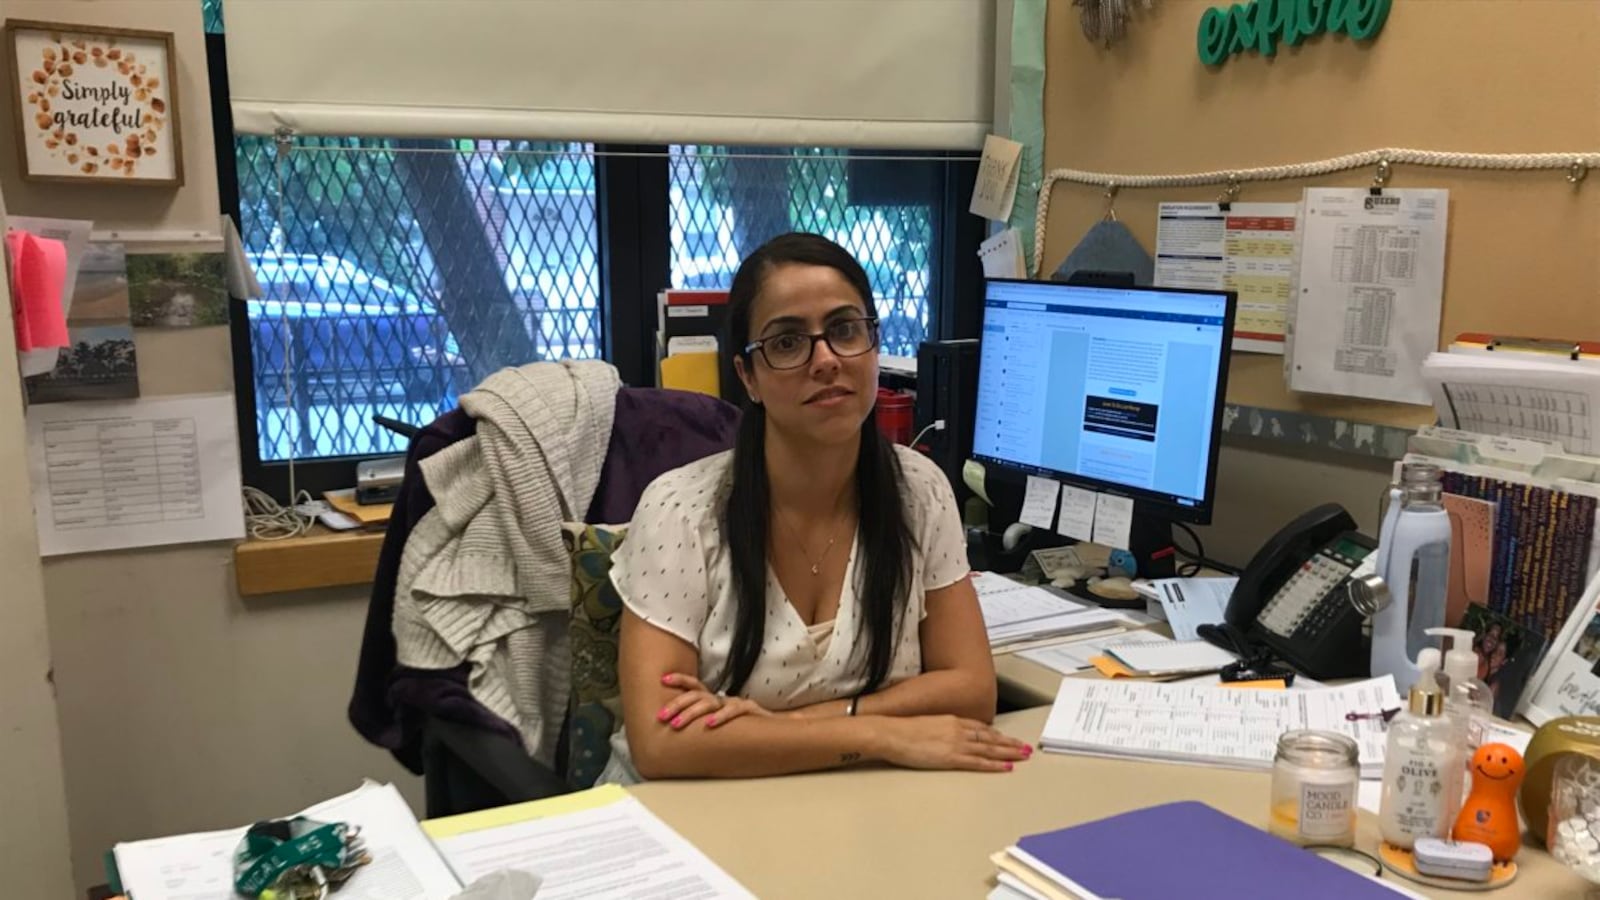 College counselor Anna Karabelas sits in her office at Queens Technical High School, where she exposes students to the college application process.